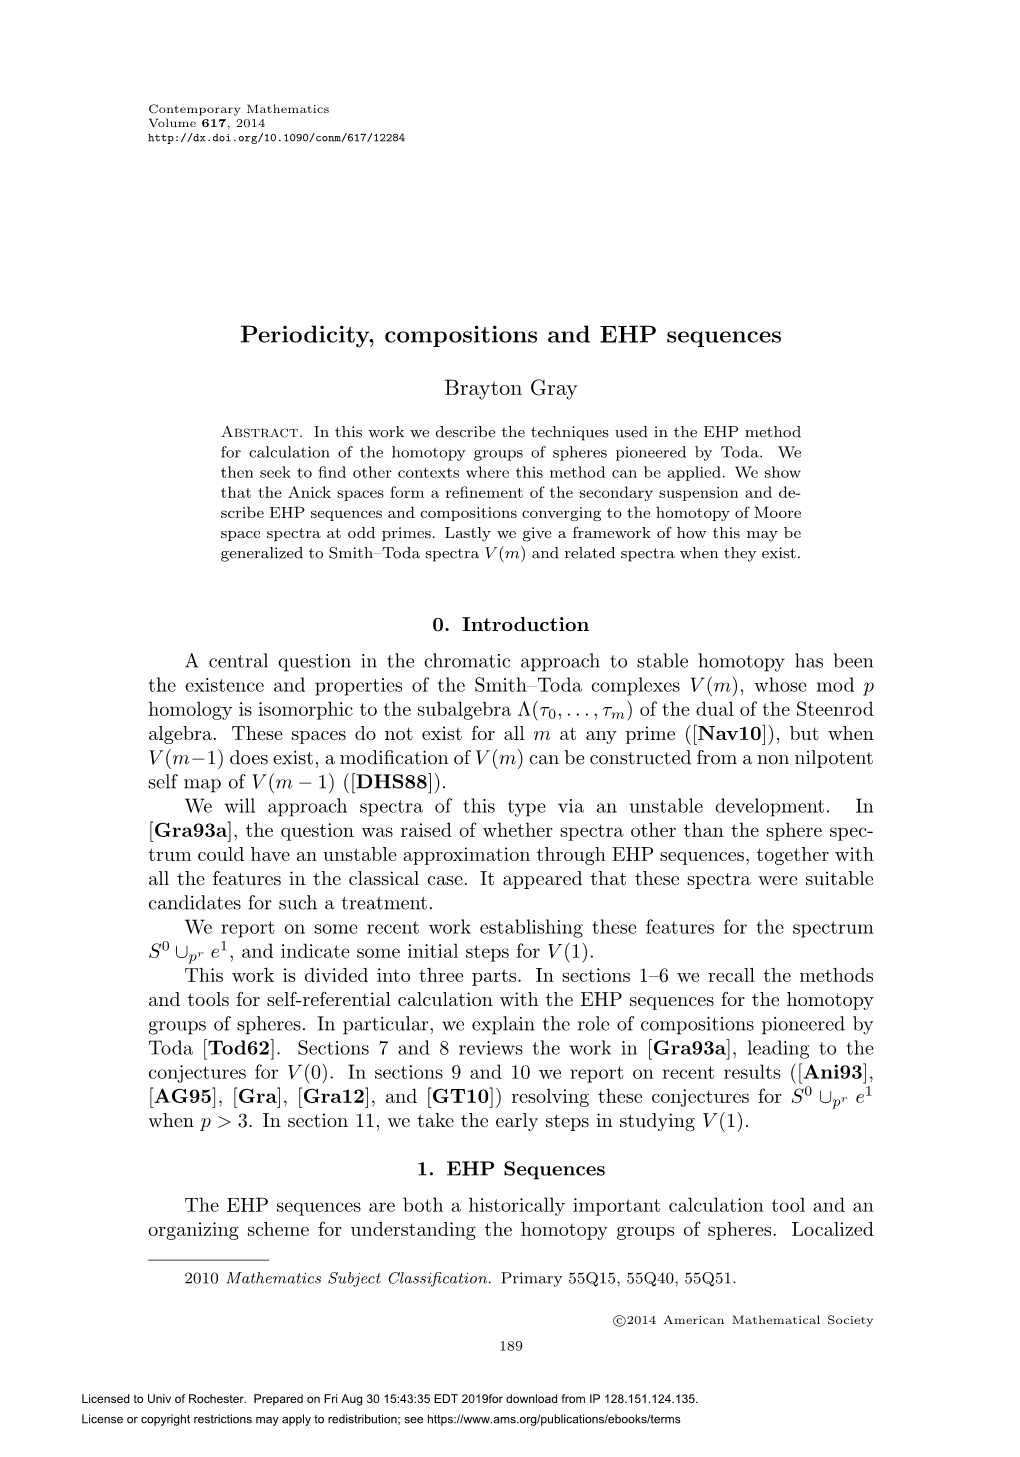 Periodicity, Compositions and EHP Sequences